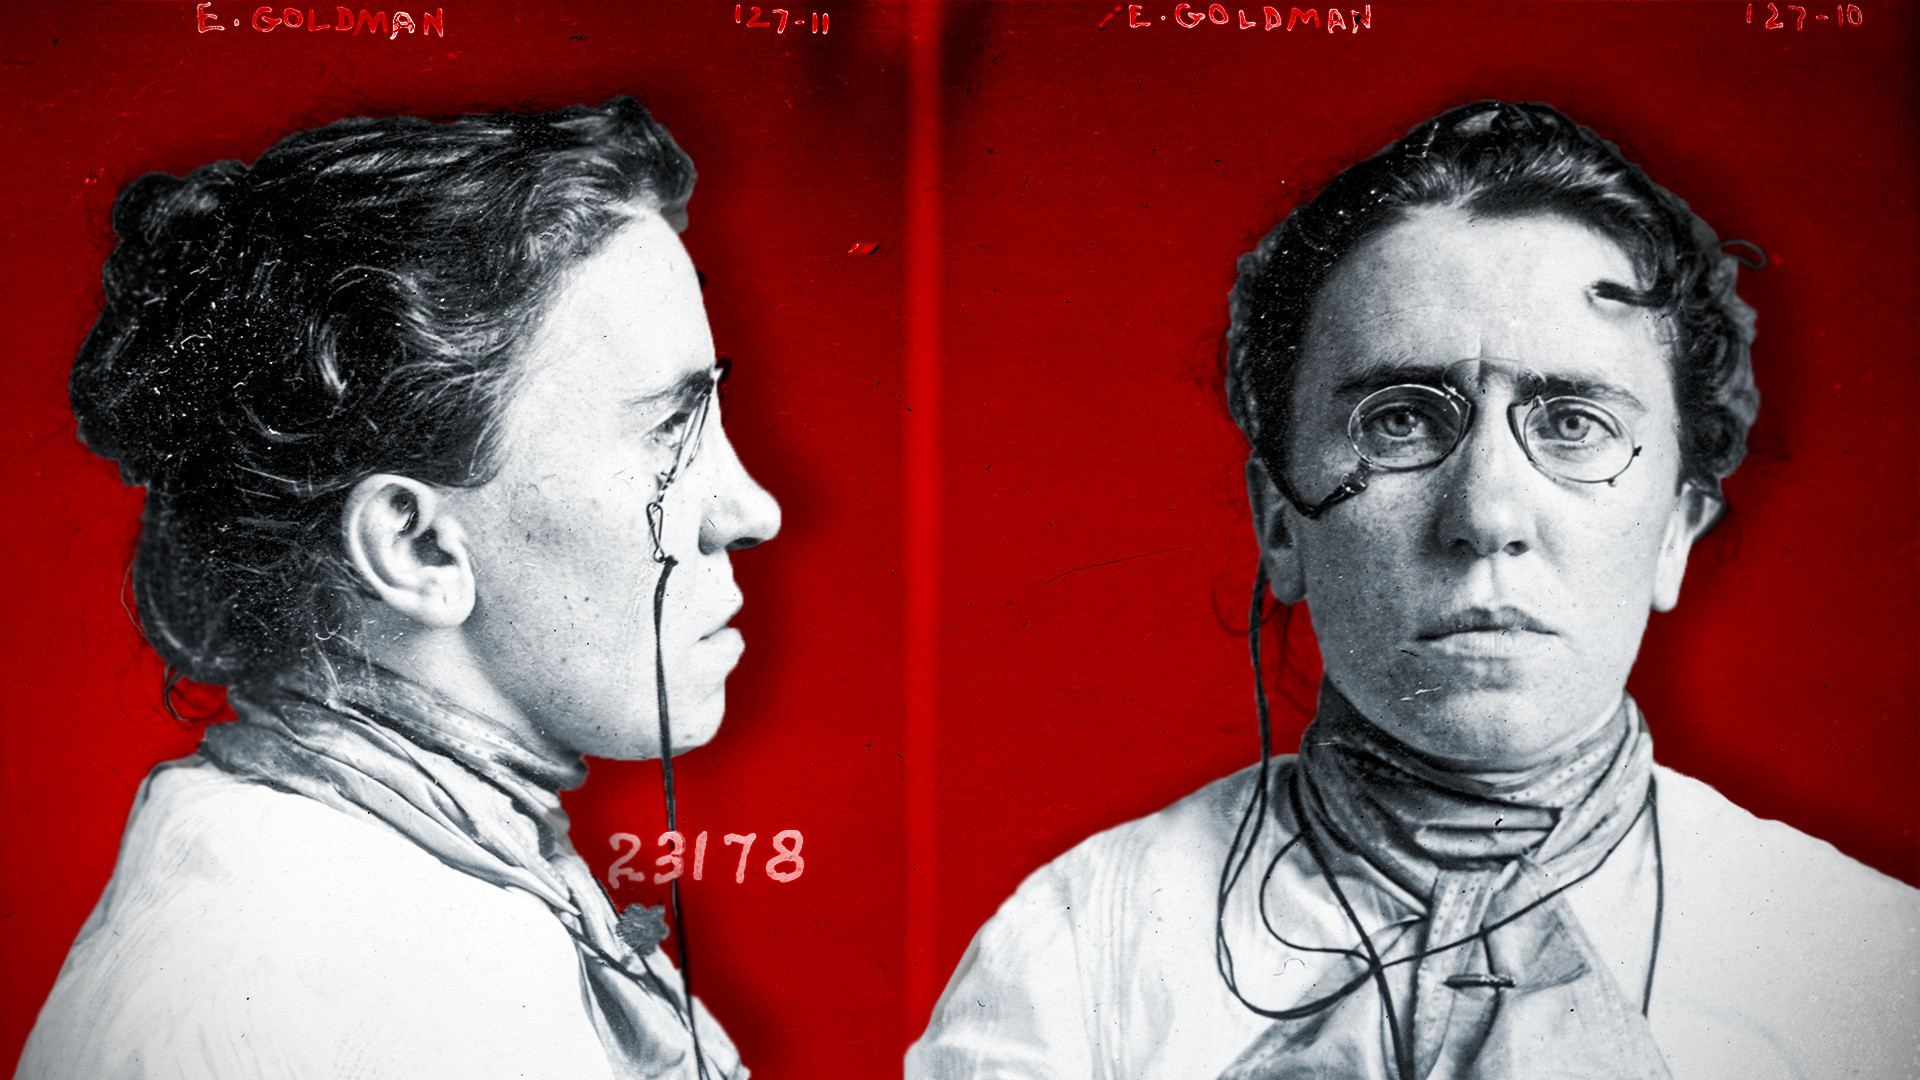 Mug shot taken in 1901 when Goldman was implicated in the assassination of President McKinley.